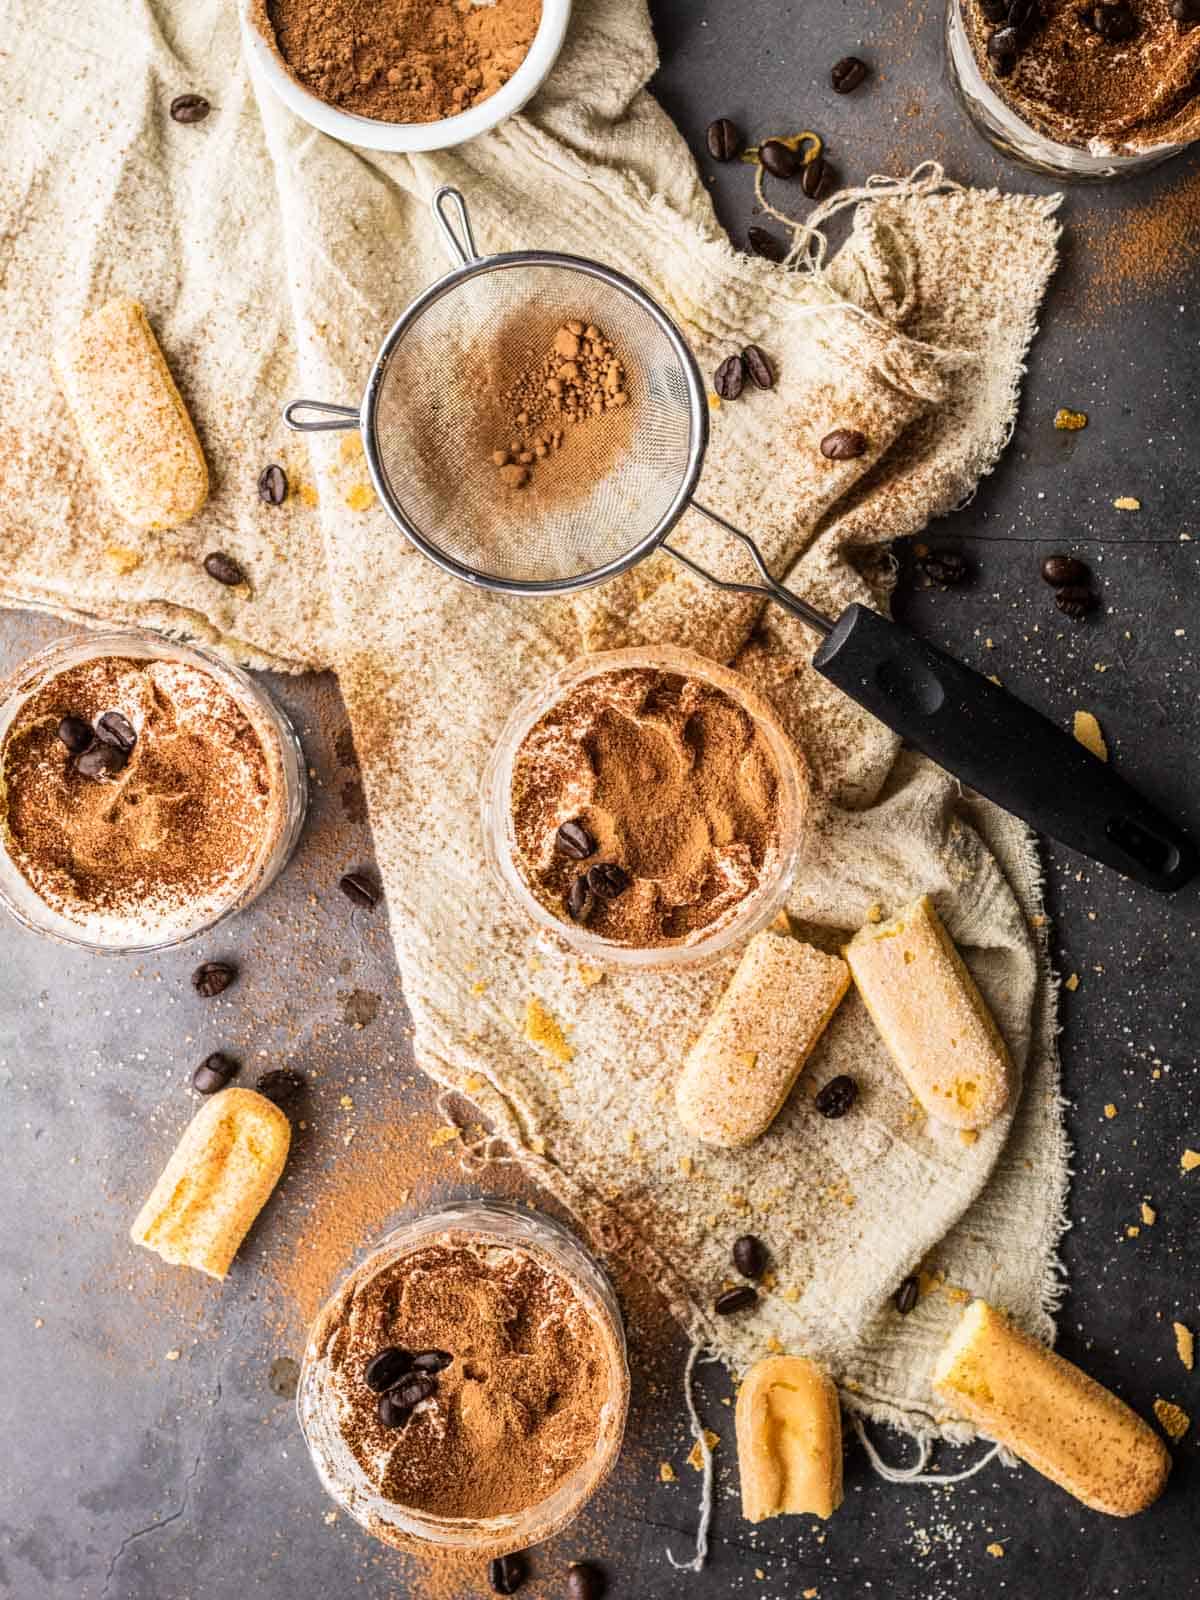 glasses filled with tiramisu dusted with cocoa powder and topped with whole coffee beans.